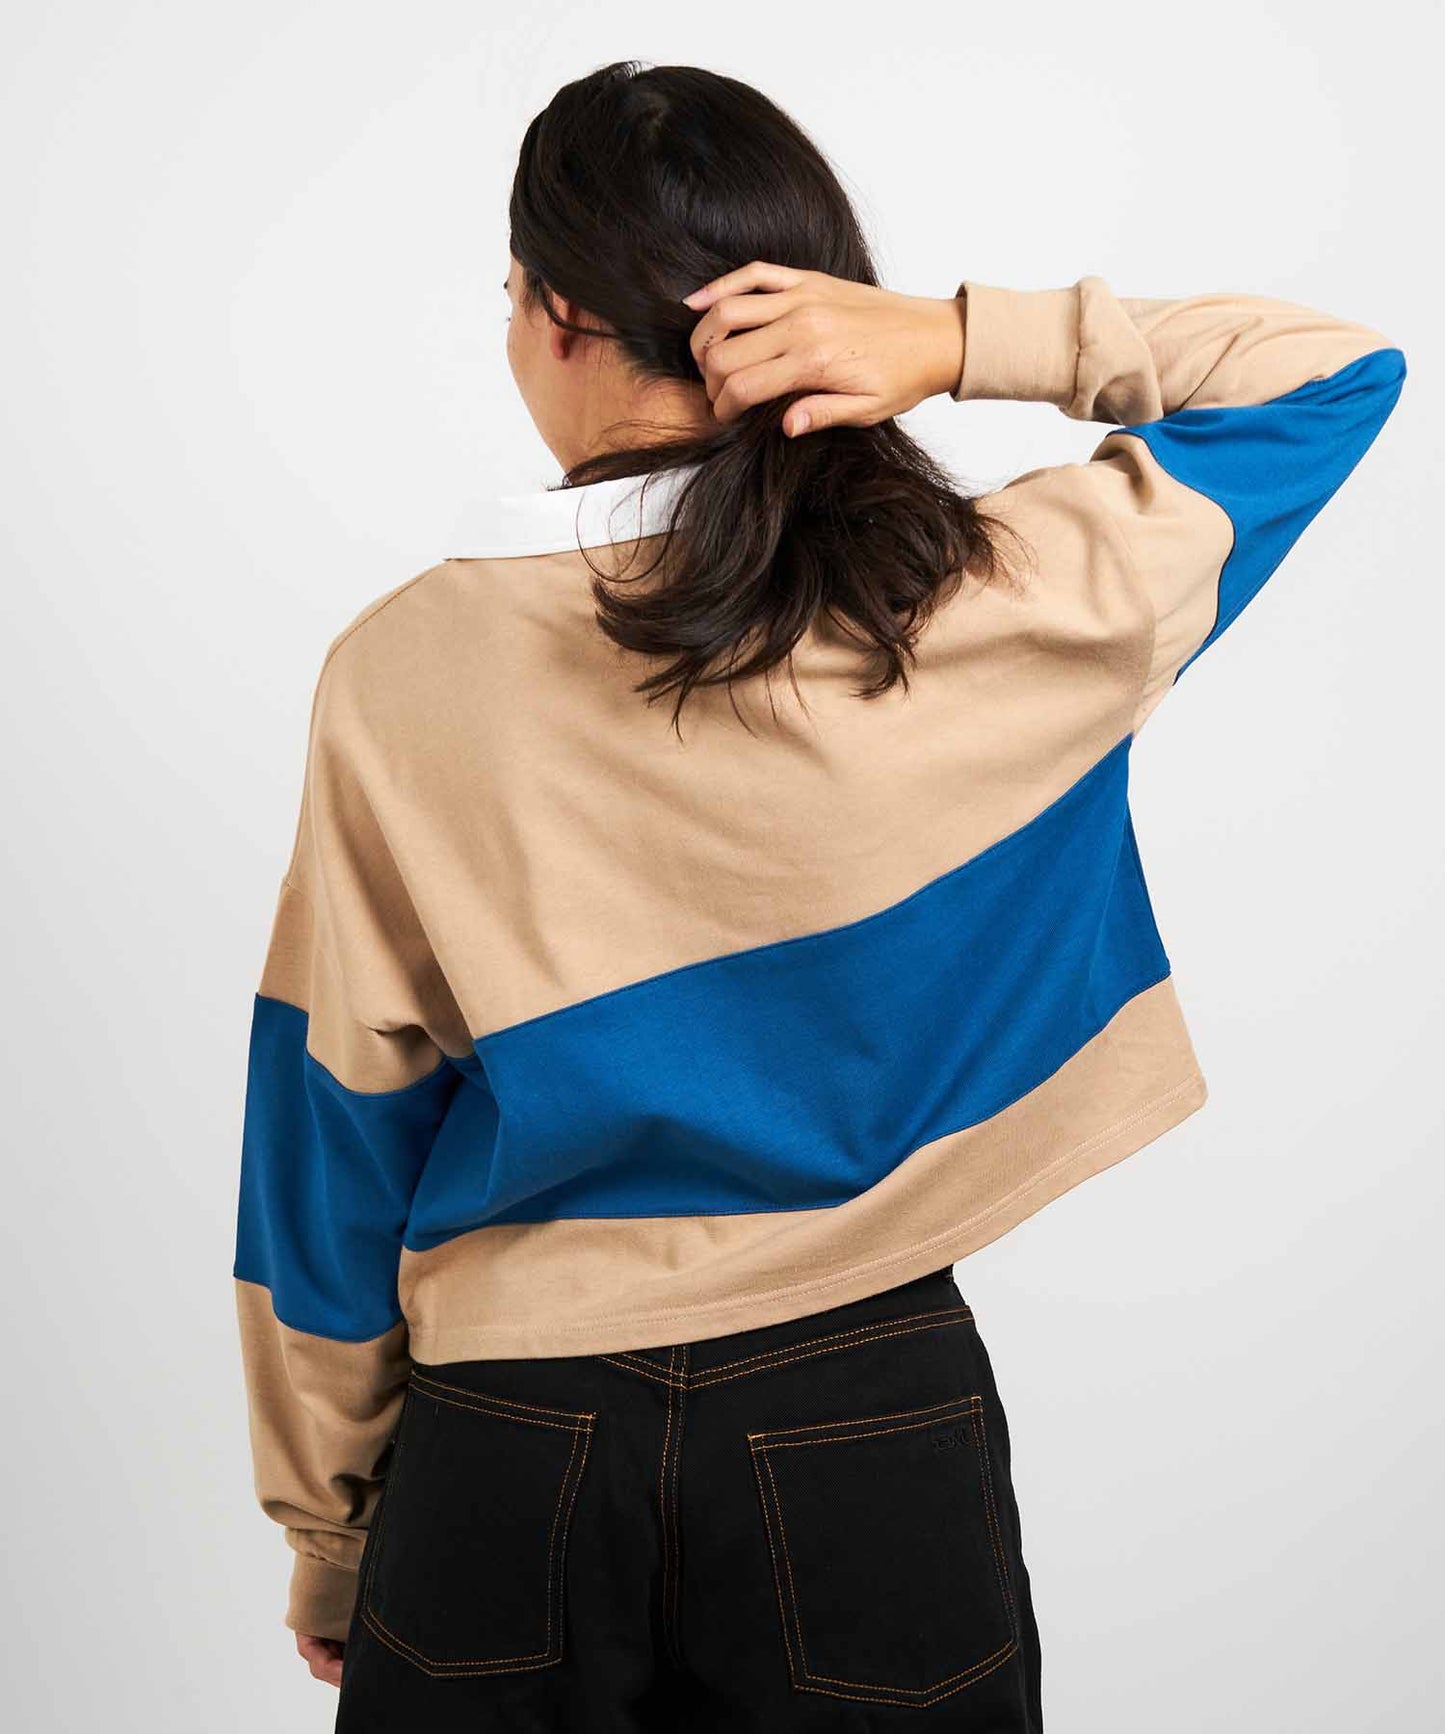 CROPPED RUGBY SHIRT